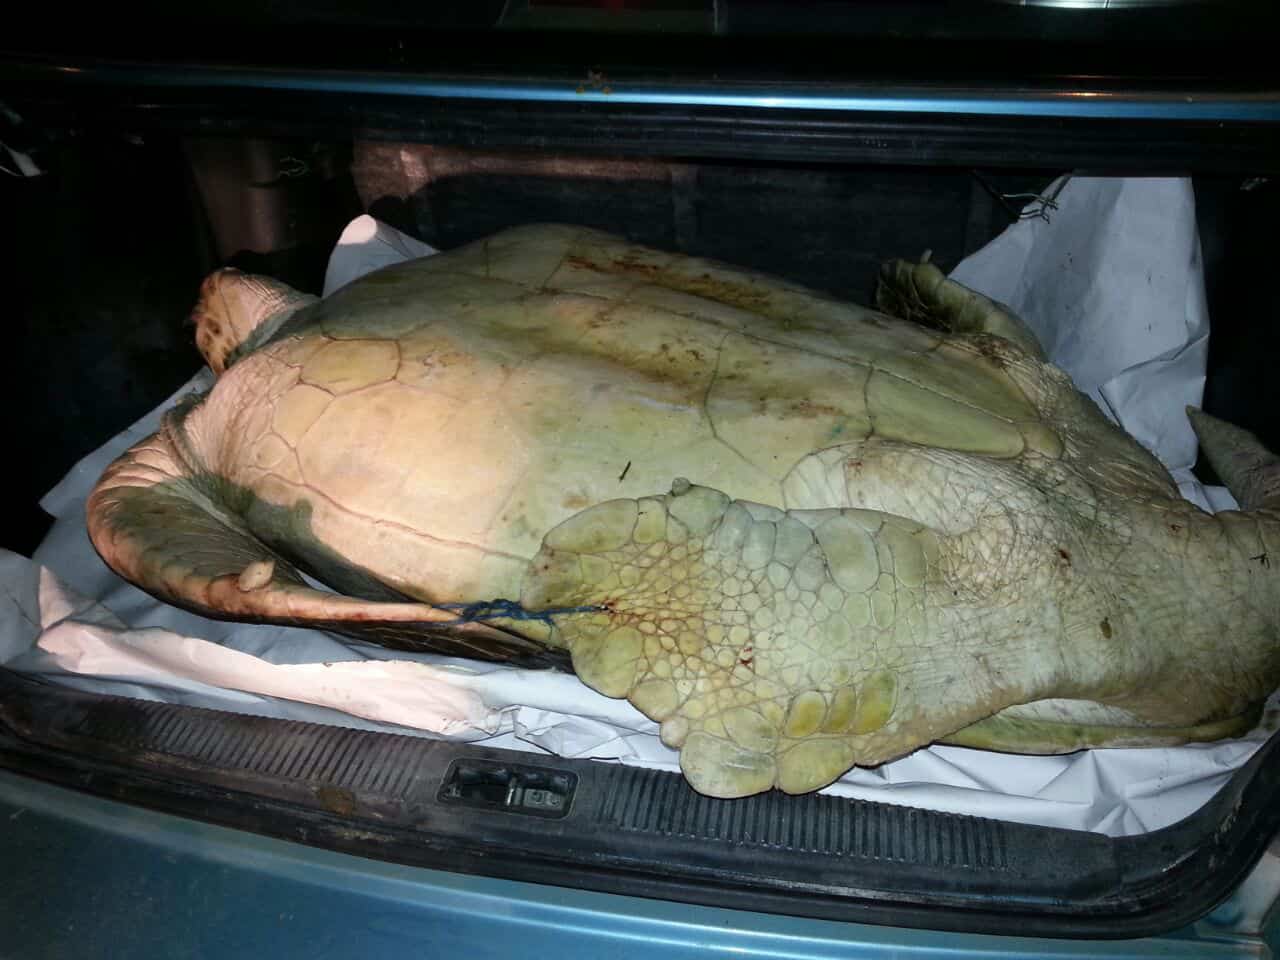 A 100-kg green sea turtle found tied in the trunk of a car in Limón on July 3, 2015.